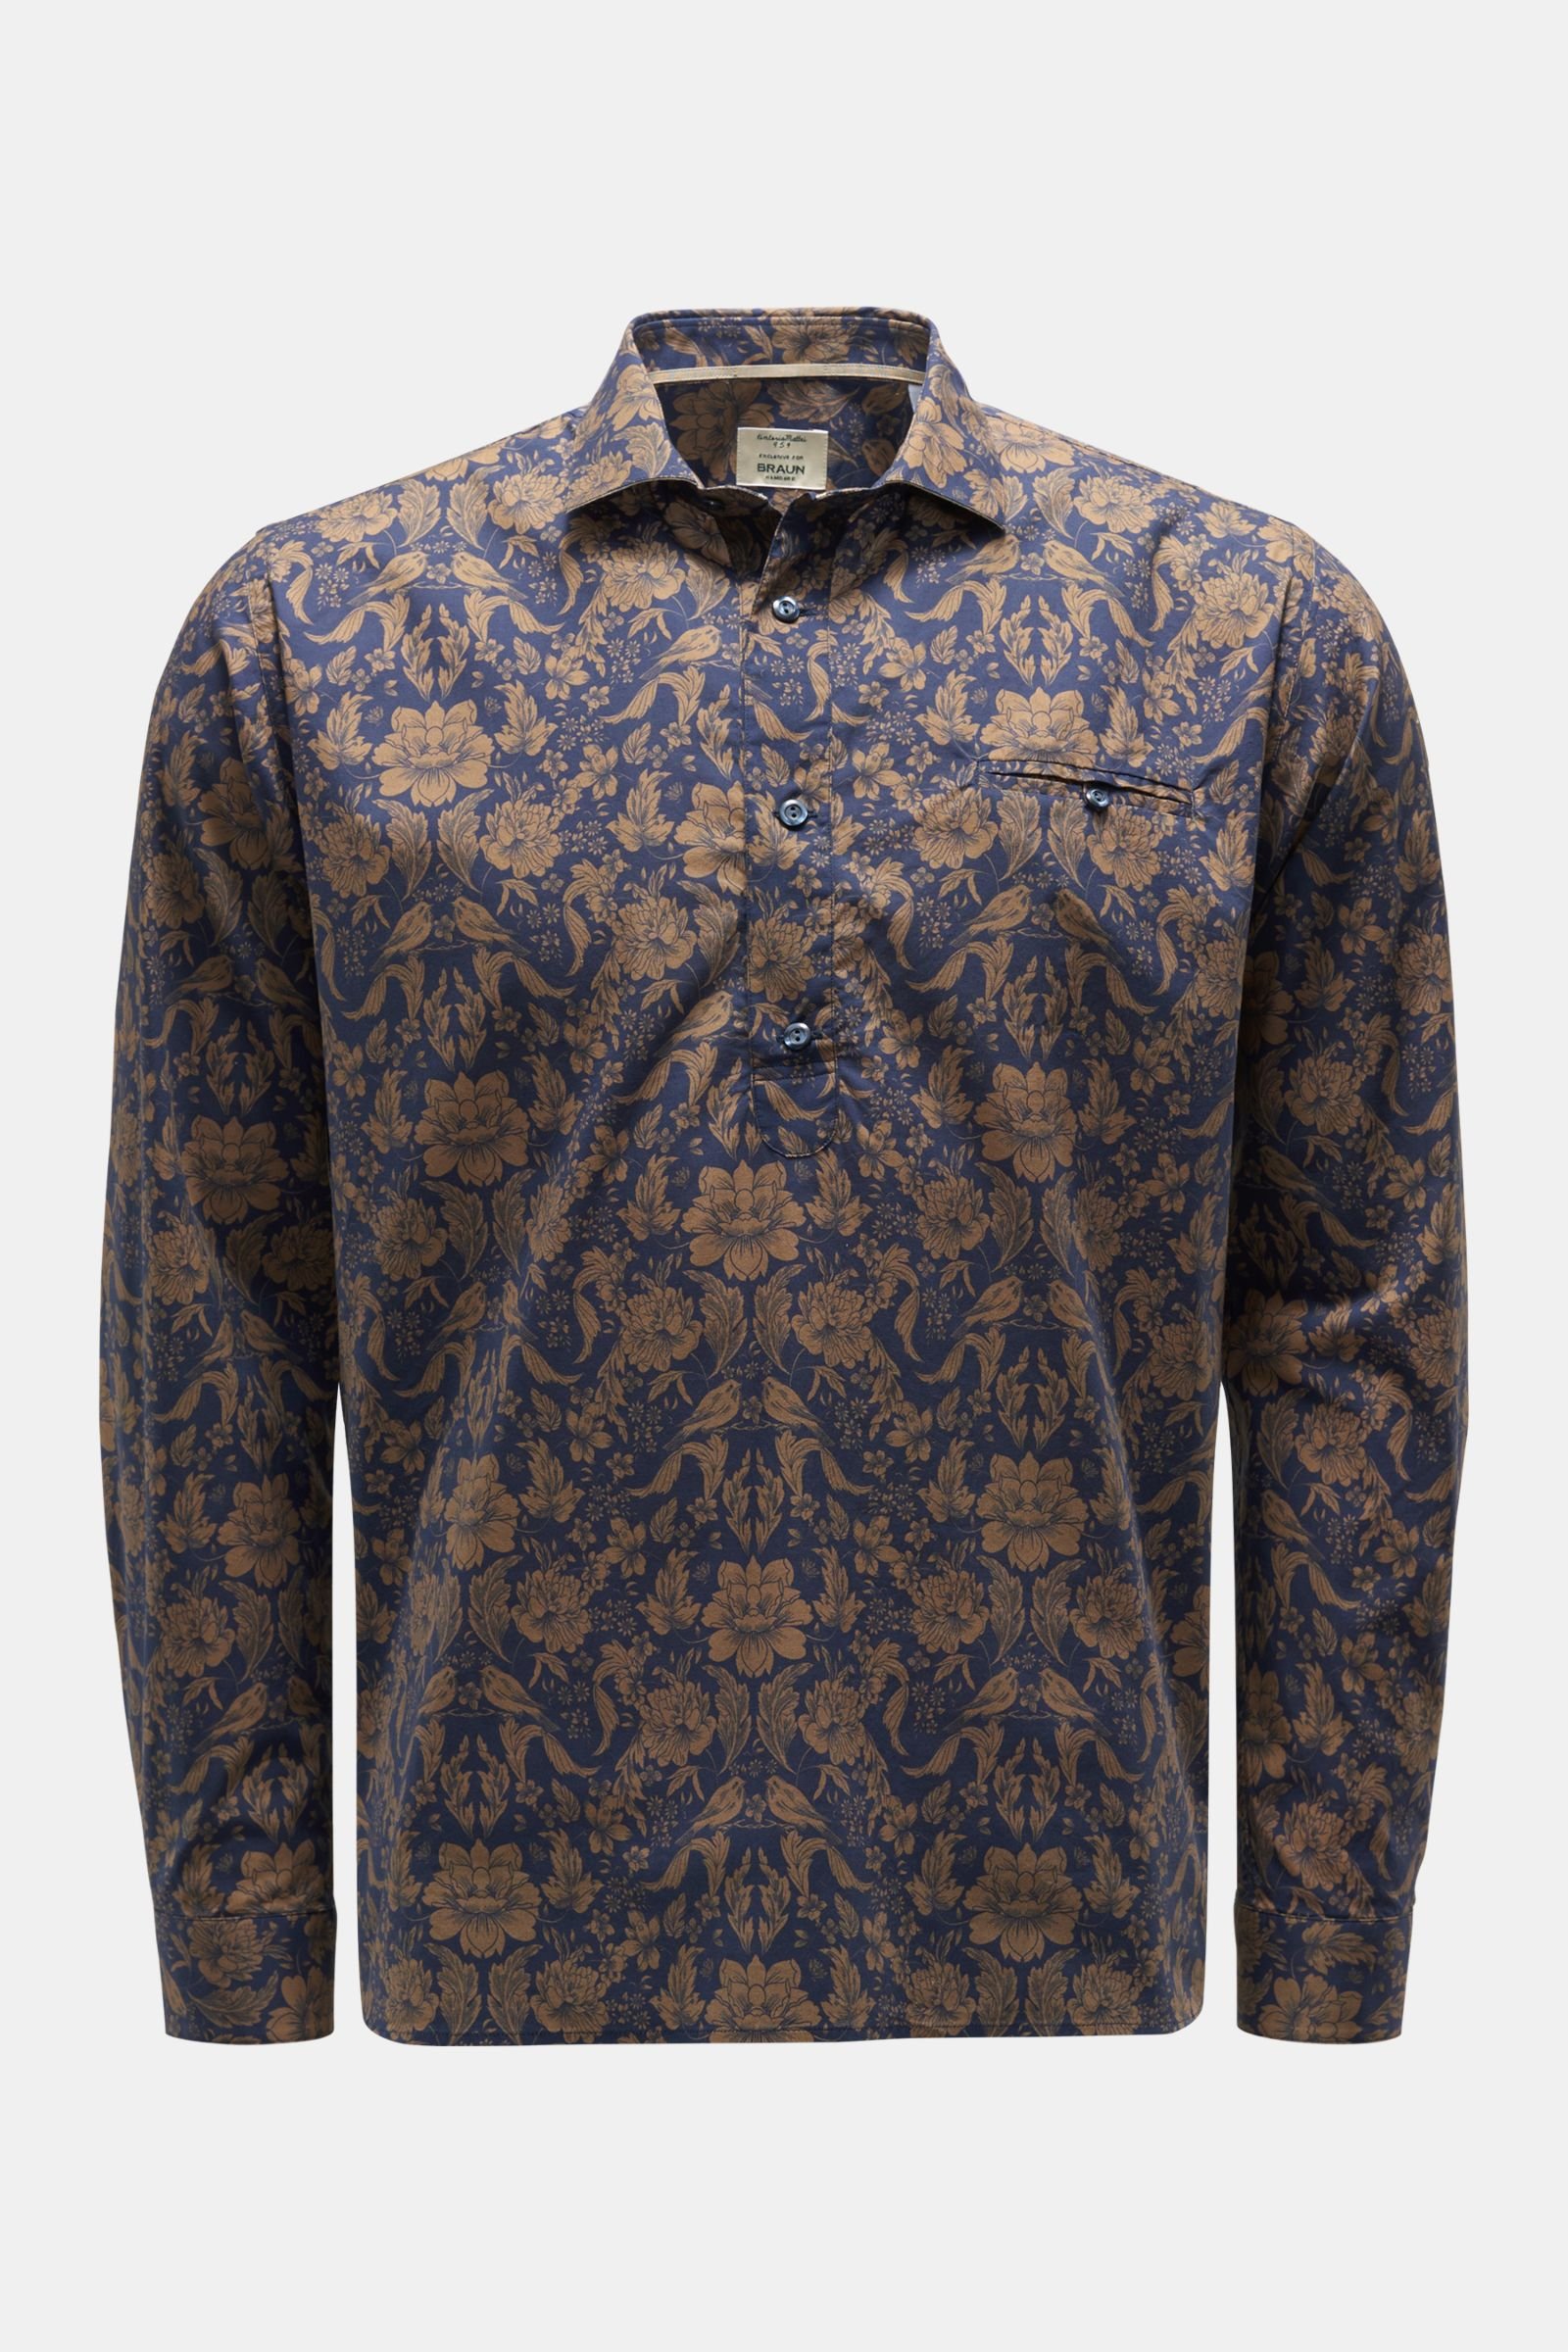 Popover shirt narrow collar navy/brown patterned